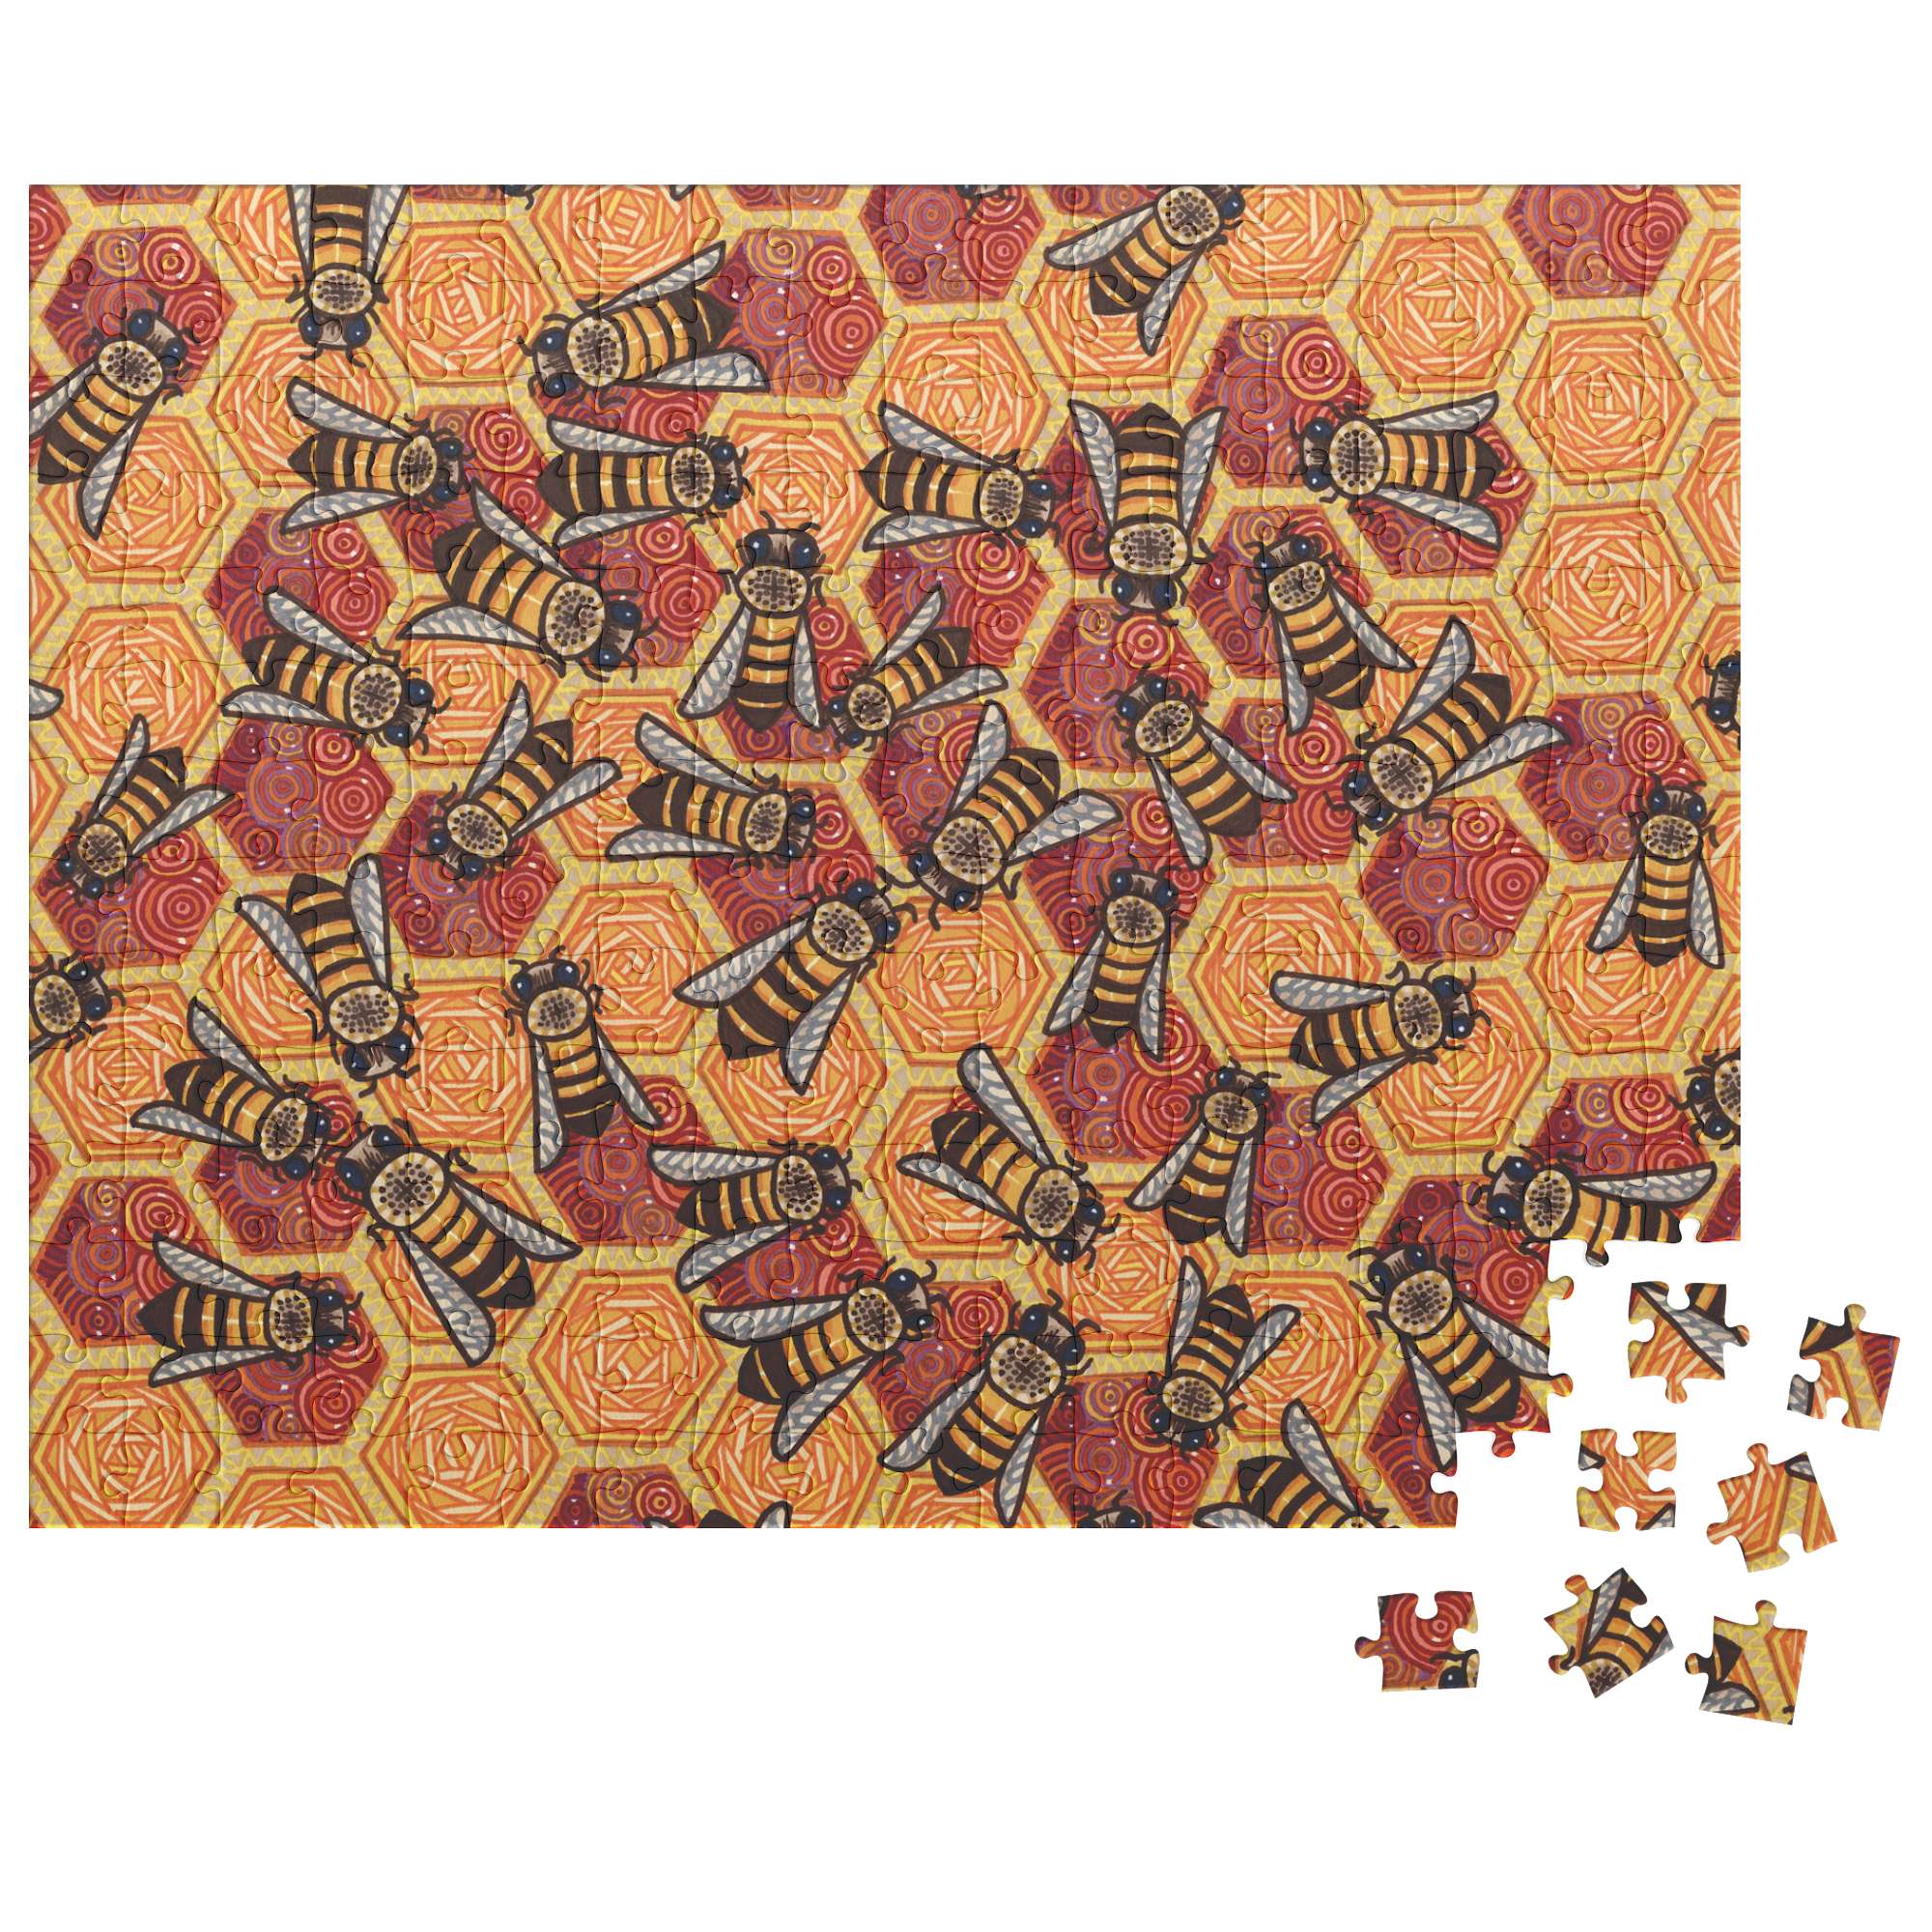 A Honeycomb Harmony Puzzle featuring a pattern of bees on a textured, orange, and yellow background, with one piece detached to the side.